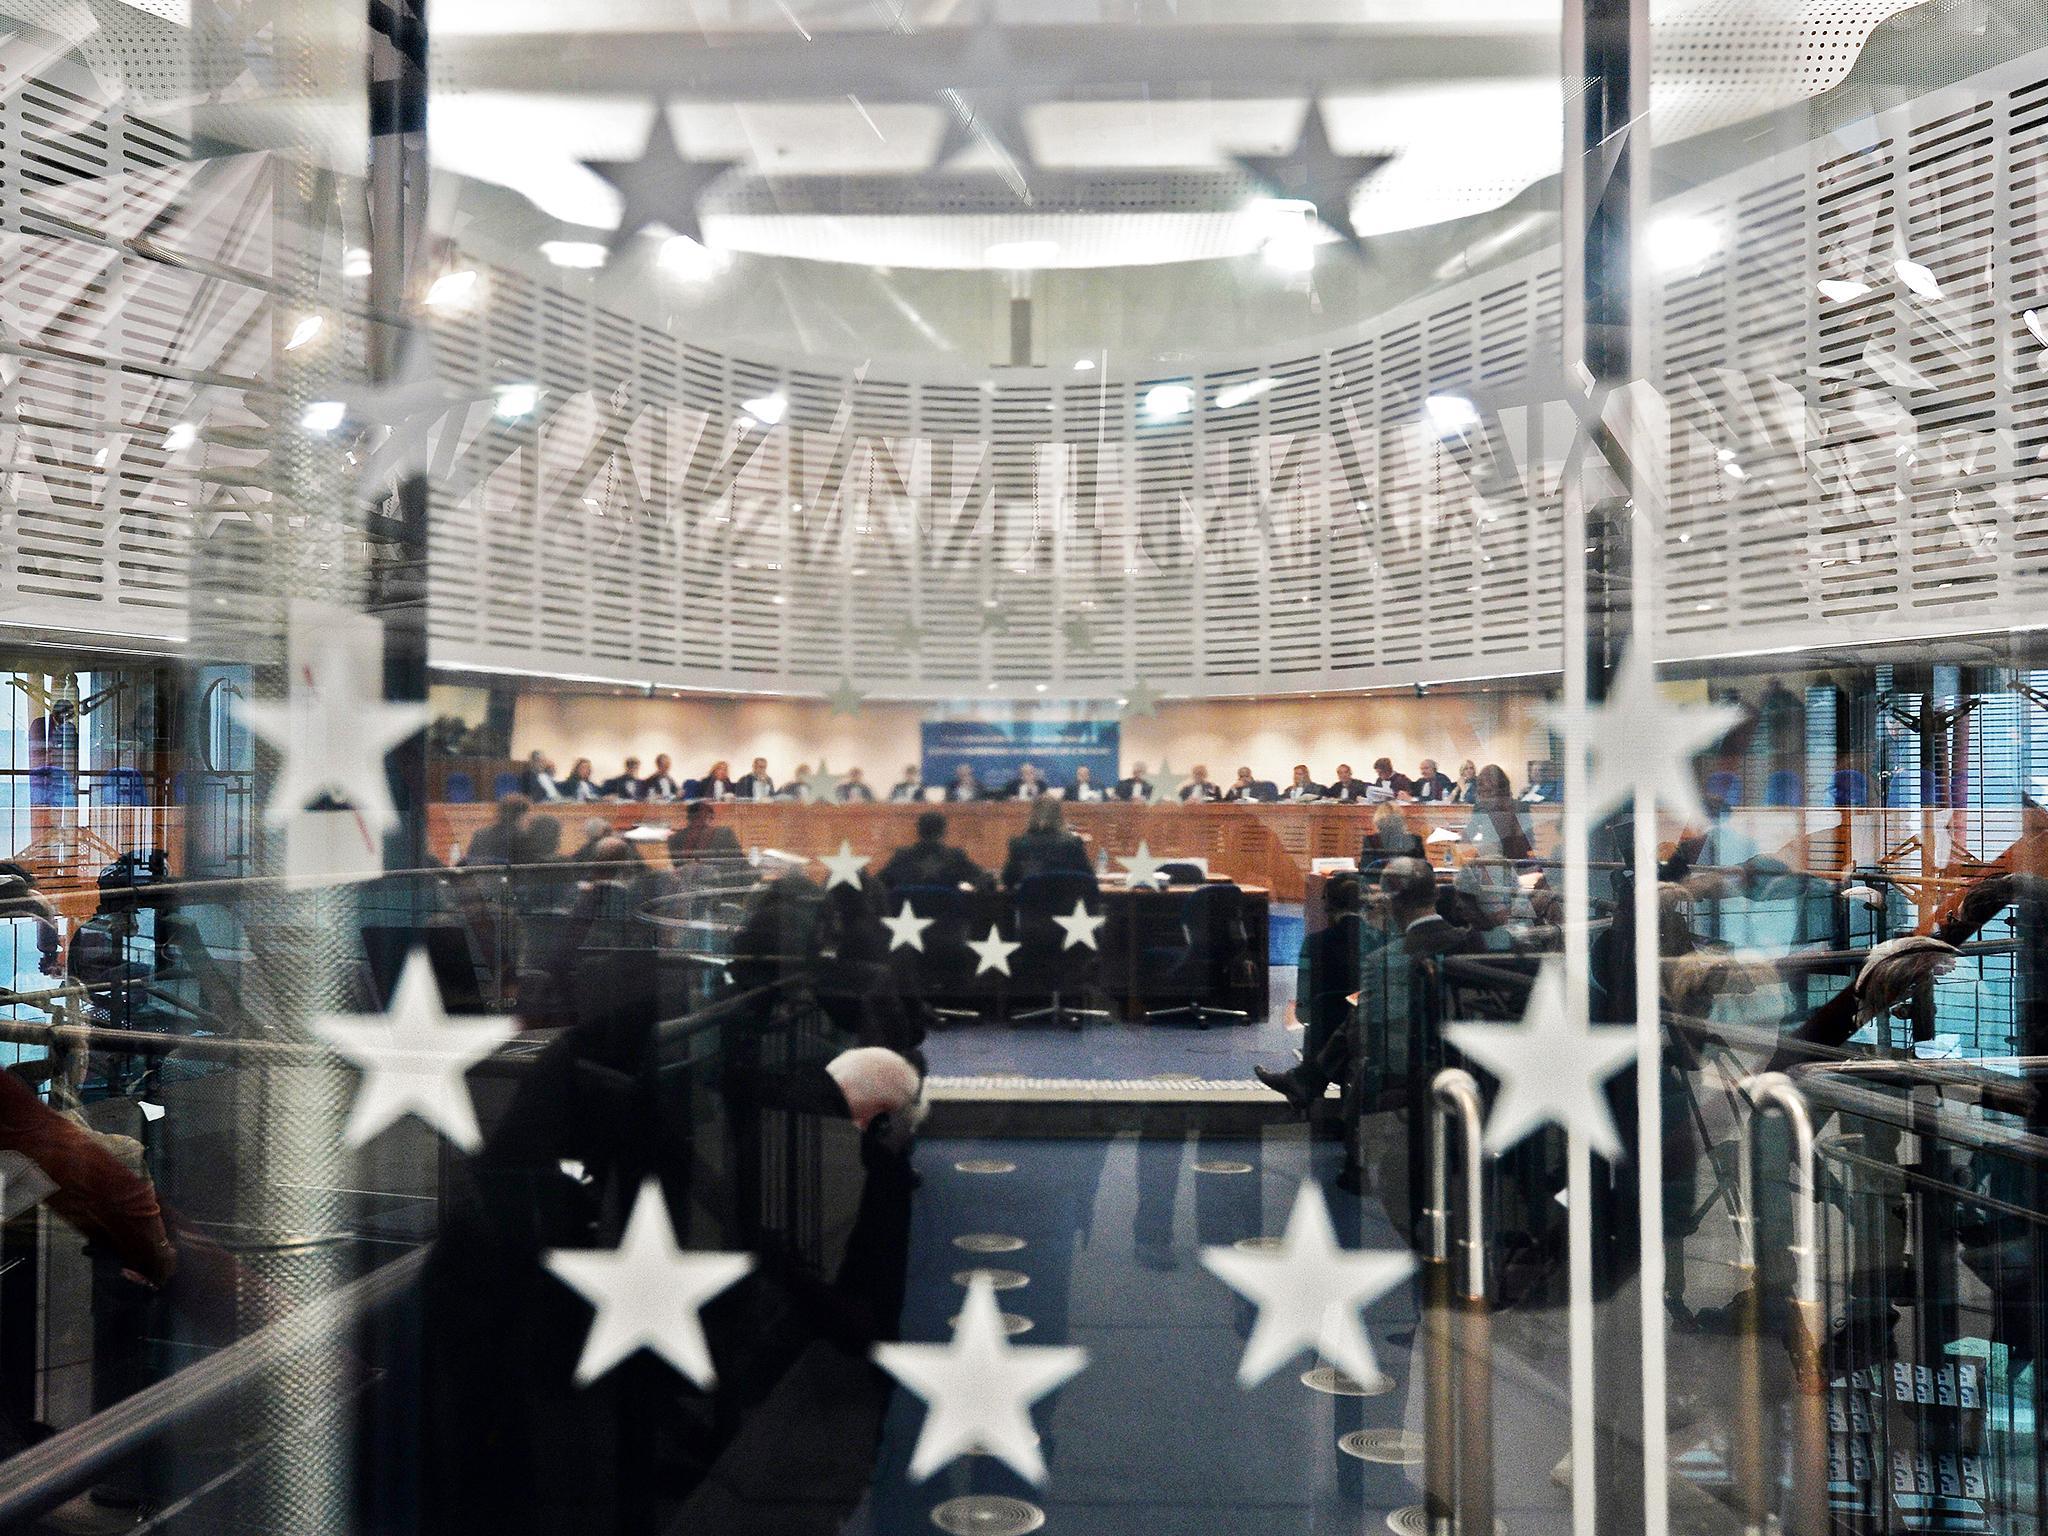 The European Court of Human Rights provides 'another powerful argument for remaining part of the EU'